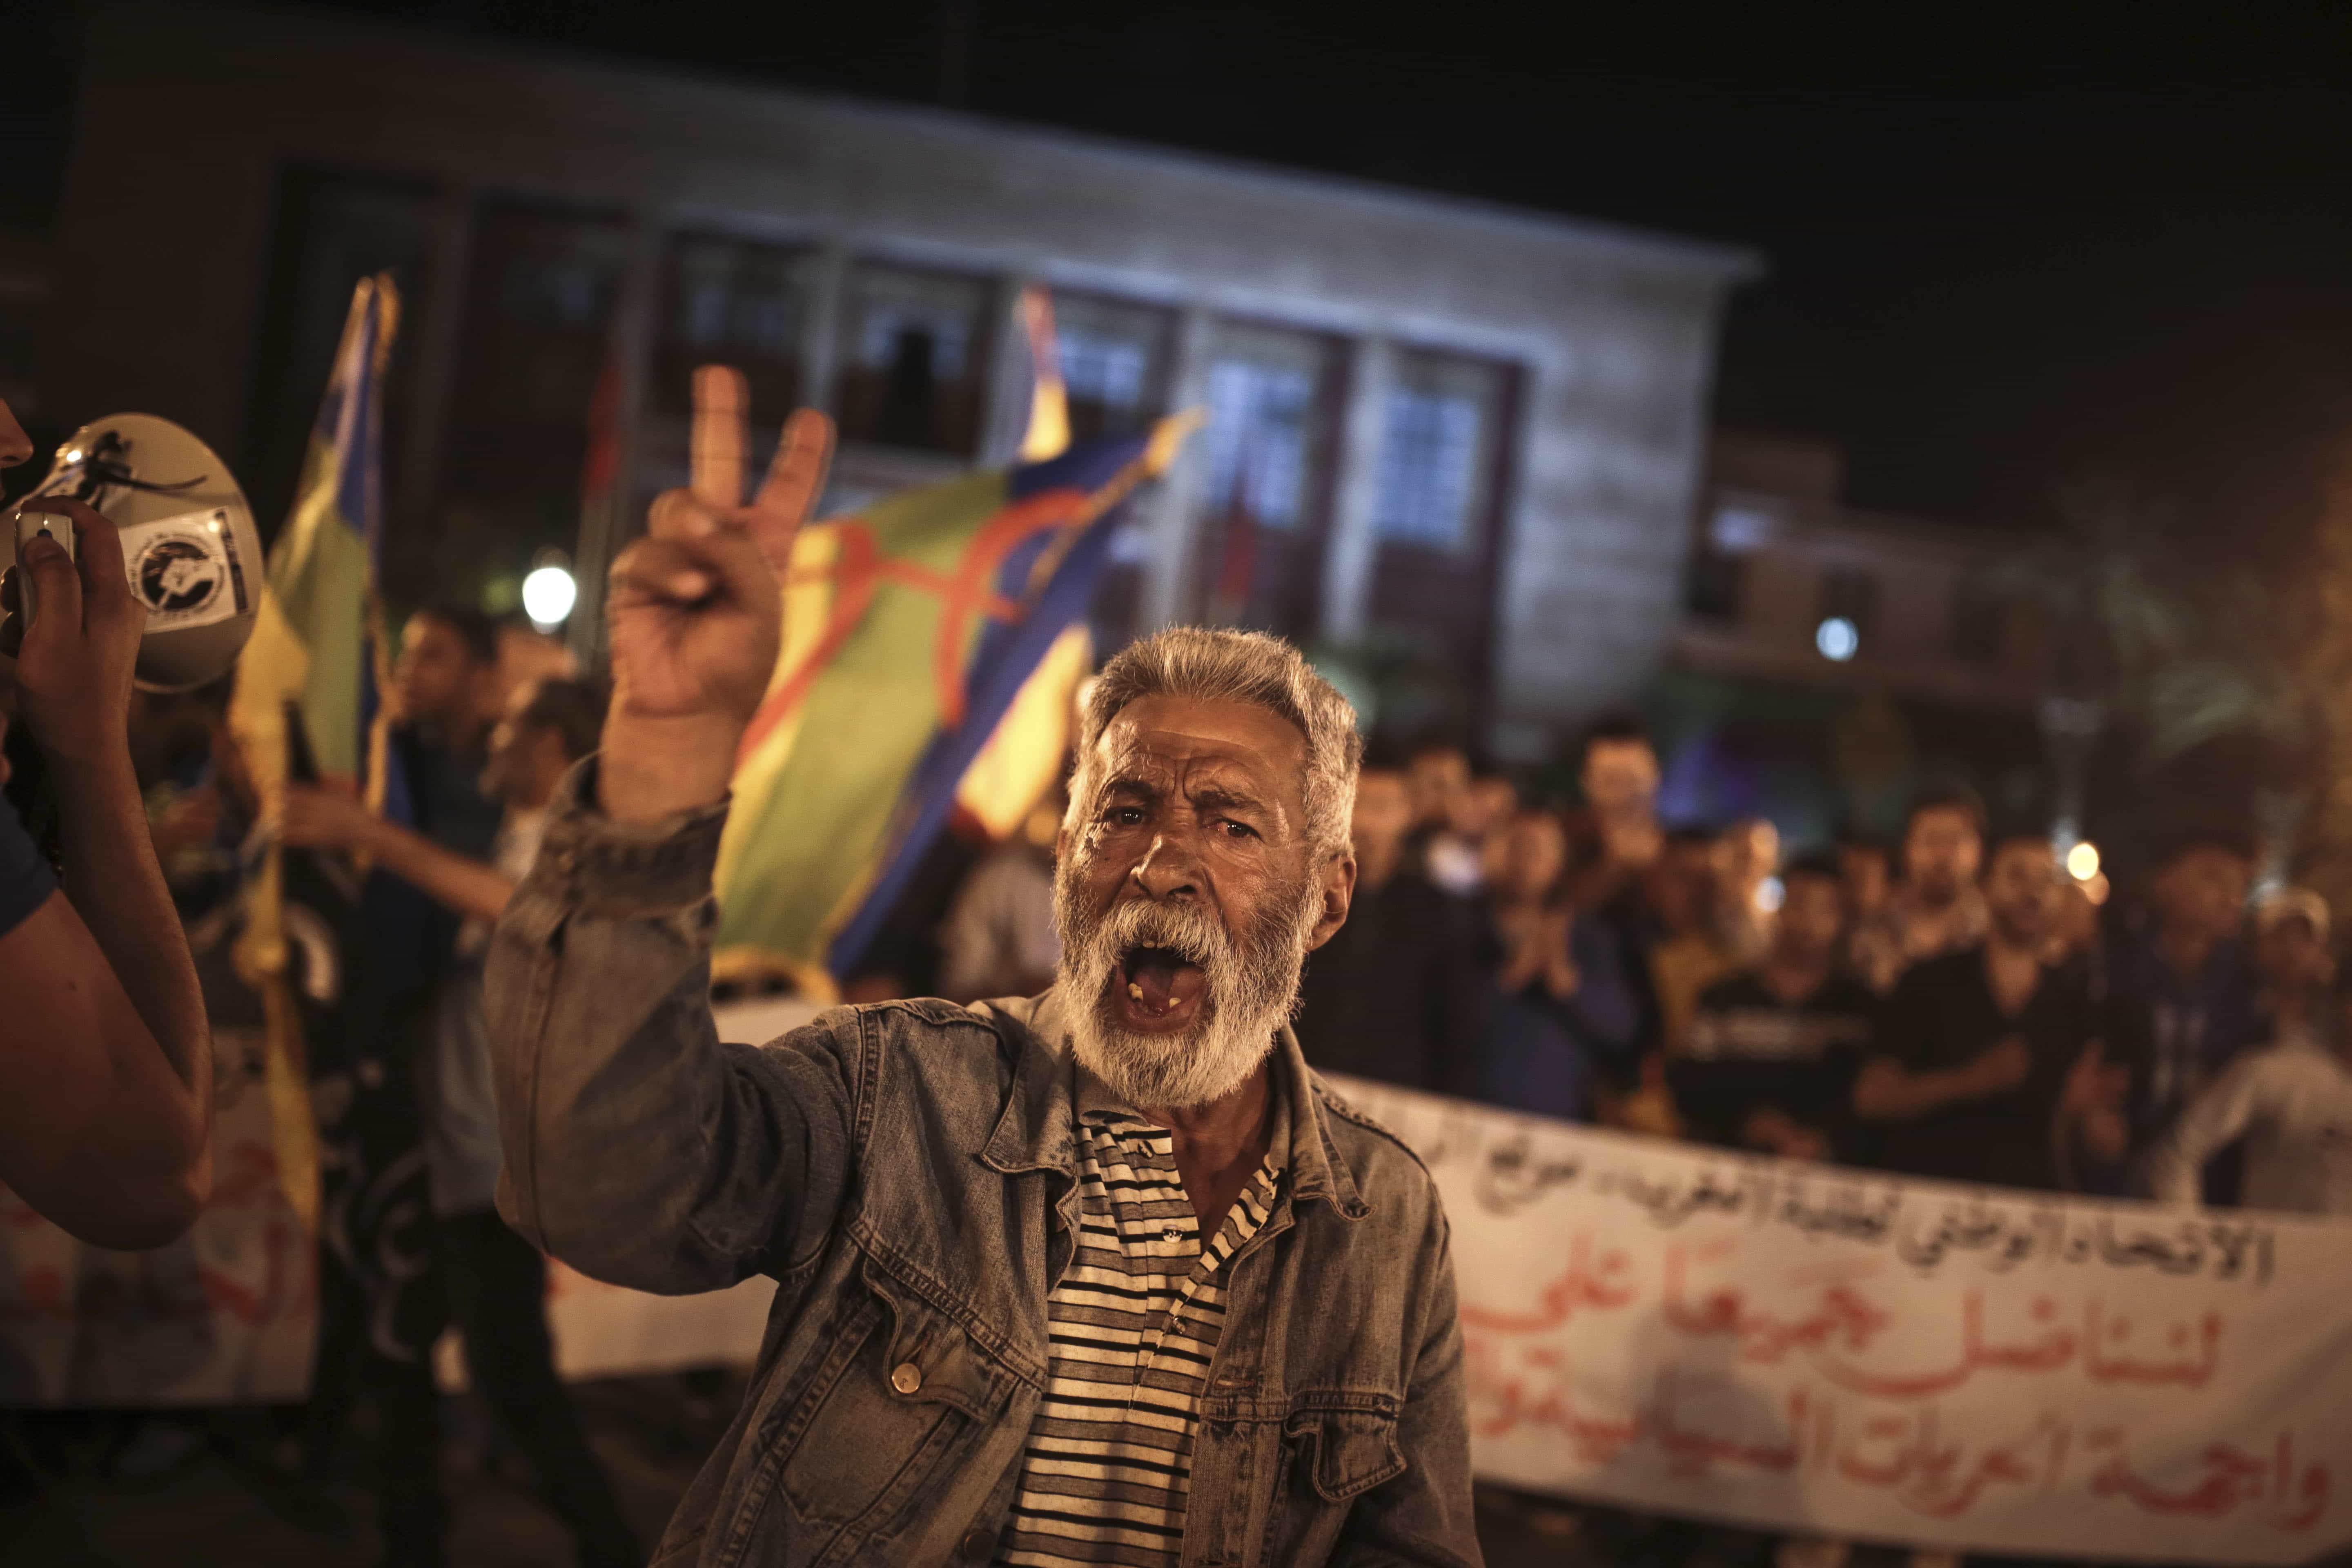 A man gestures during a demonstration in support of ongoing anti-government protests taking place in the northern Rif region, in Rabat, Morocco, 29 May 2017, AP Photo/Mosa'ab Elshamy